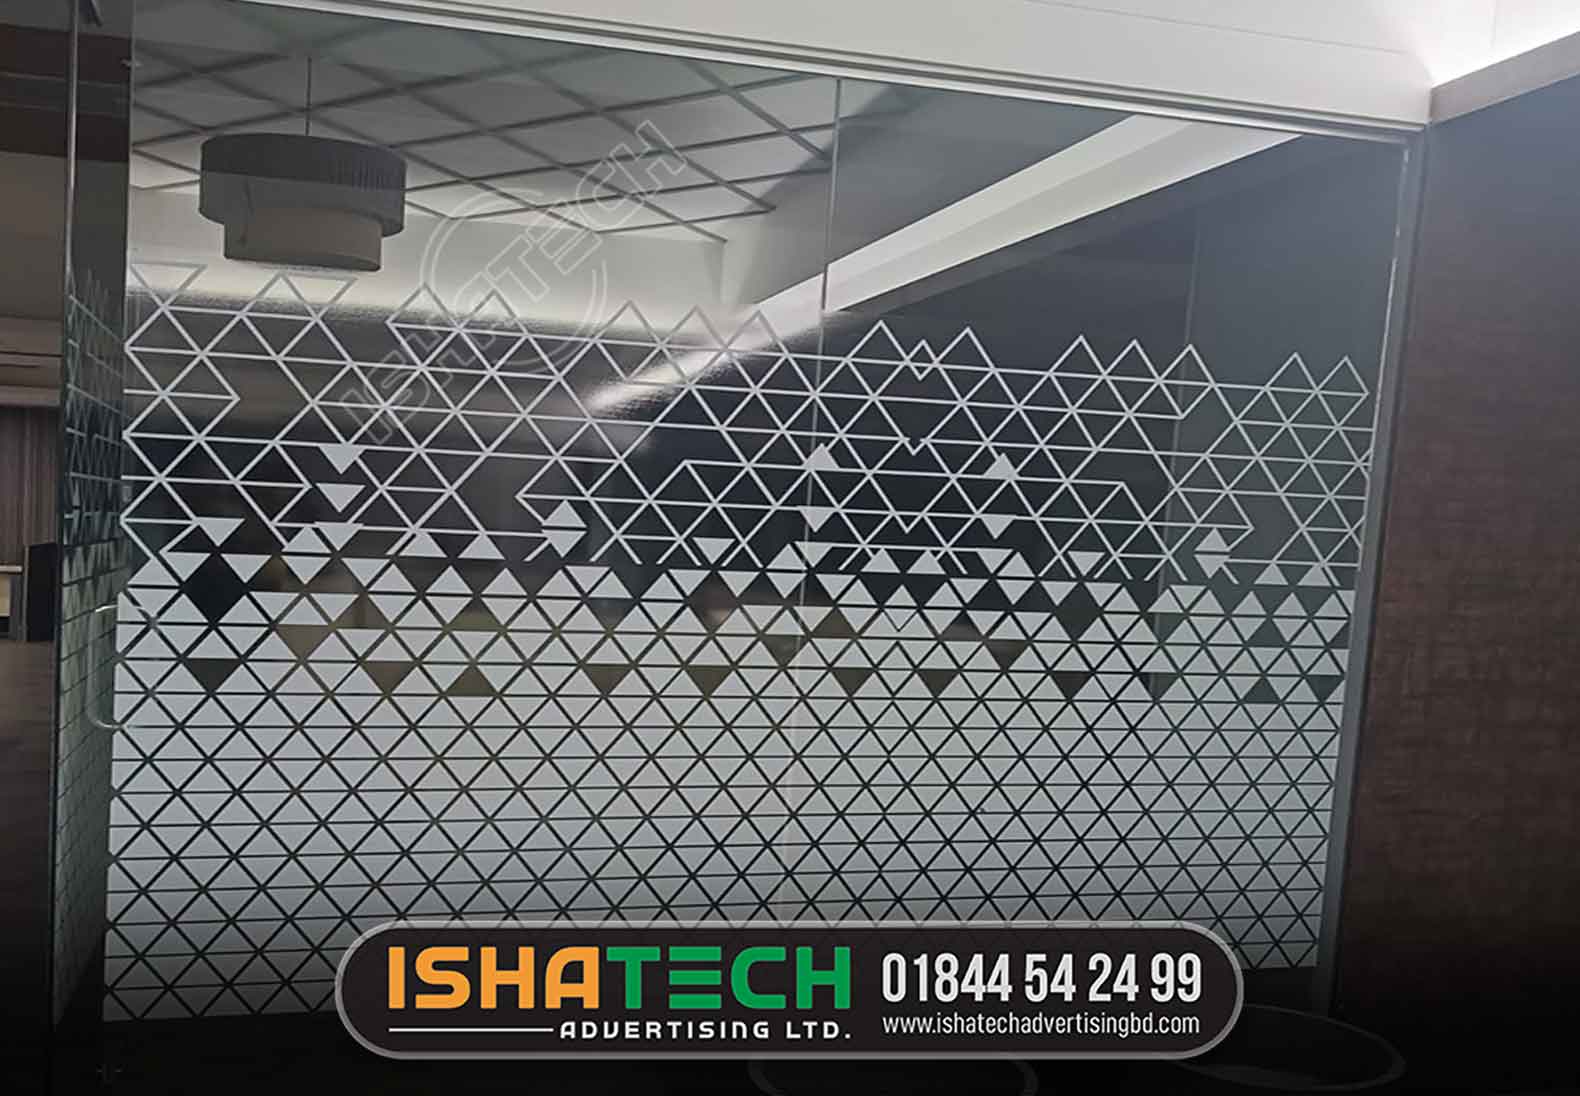 In Dubai, Ishatech Advertising is a leading supplier of premium frosted glass sticker services. Our specialty is using our excellent frosted glass designs to add privacy and luxury to your rooms. Our talented craftspeople expertly install frosted glass stickers to windows and doors to create eye-catching designs that perfectly balance style and utility. We provide a range of options, so you may choose from a delicate frosted glass sheet or a frosted glass texture design. With Ishatech Advertising's unmatched skill in frosted glass stickers—every detail is expertly crafted—you may enhance the ambience of your surroundings.